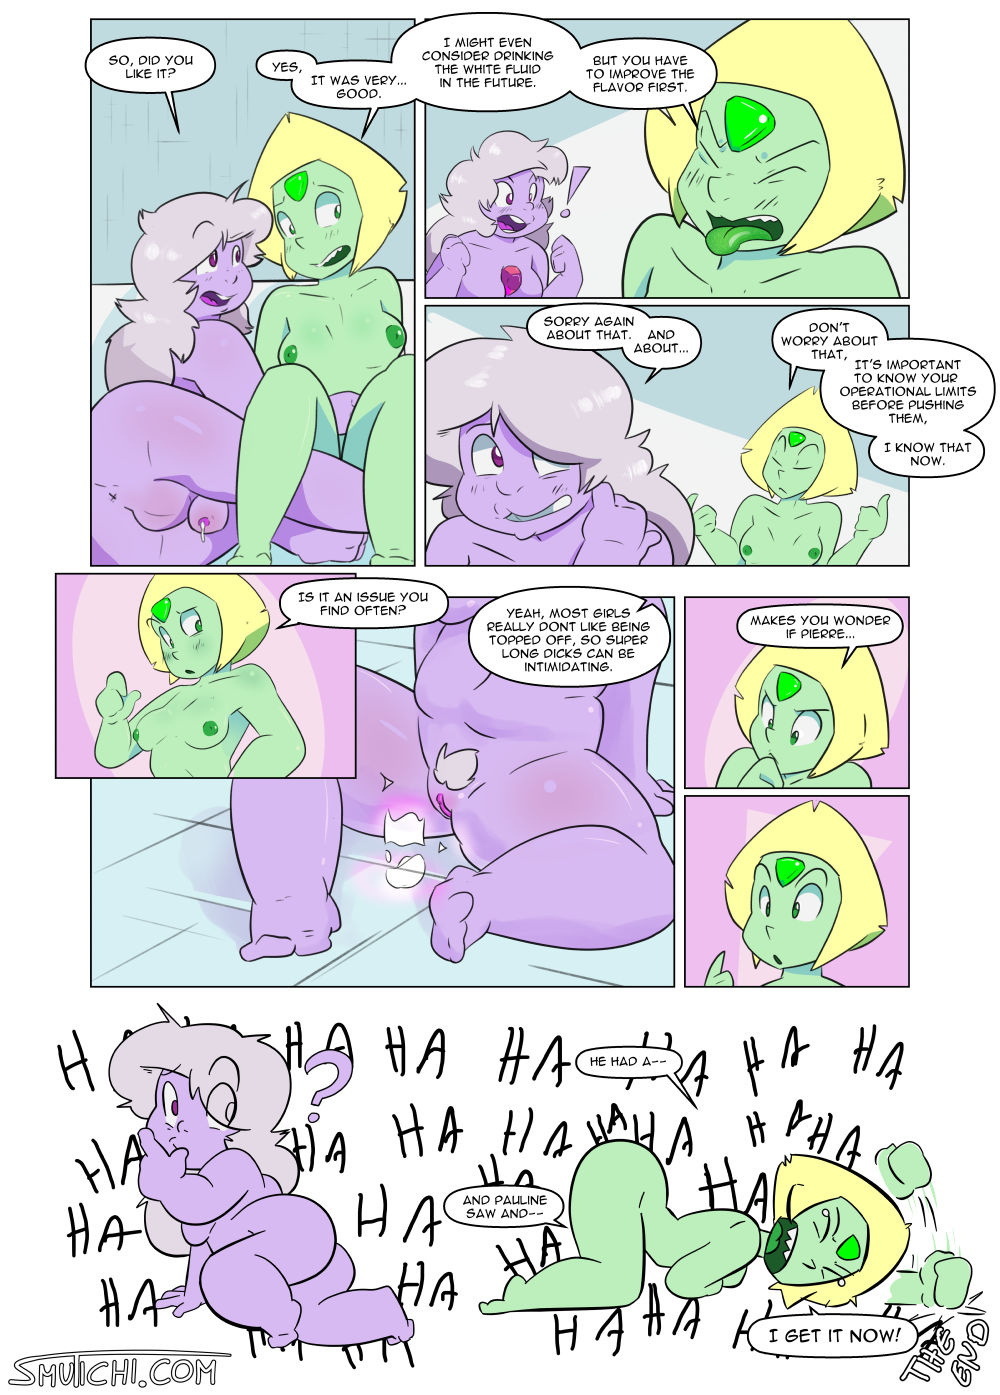 Comedy Analysis - Page 33